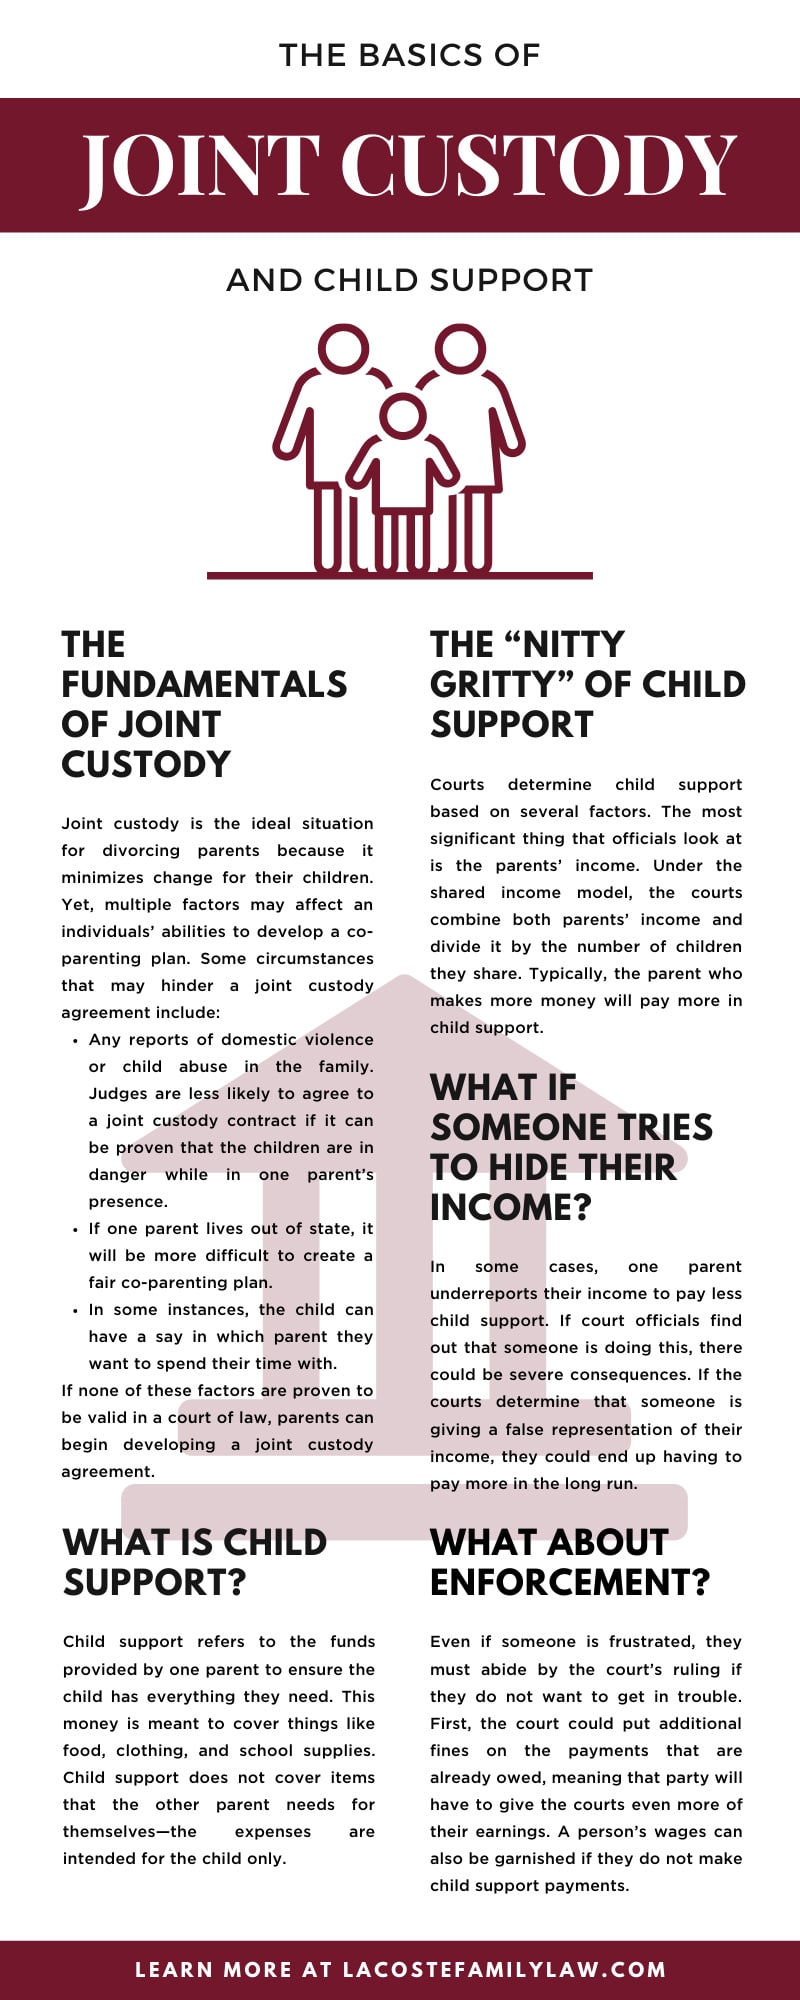 Joint Custody and Child Support